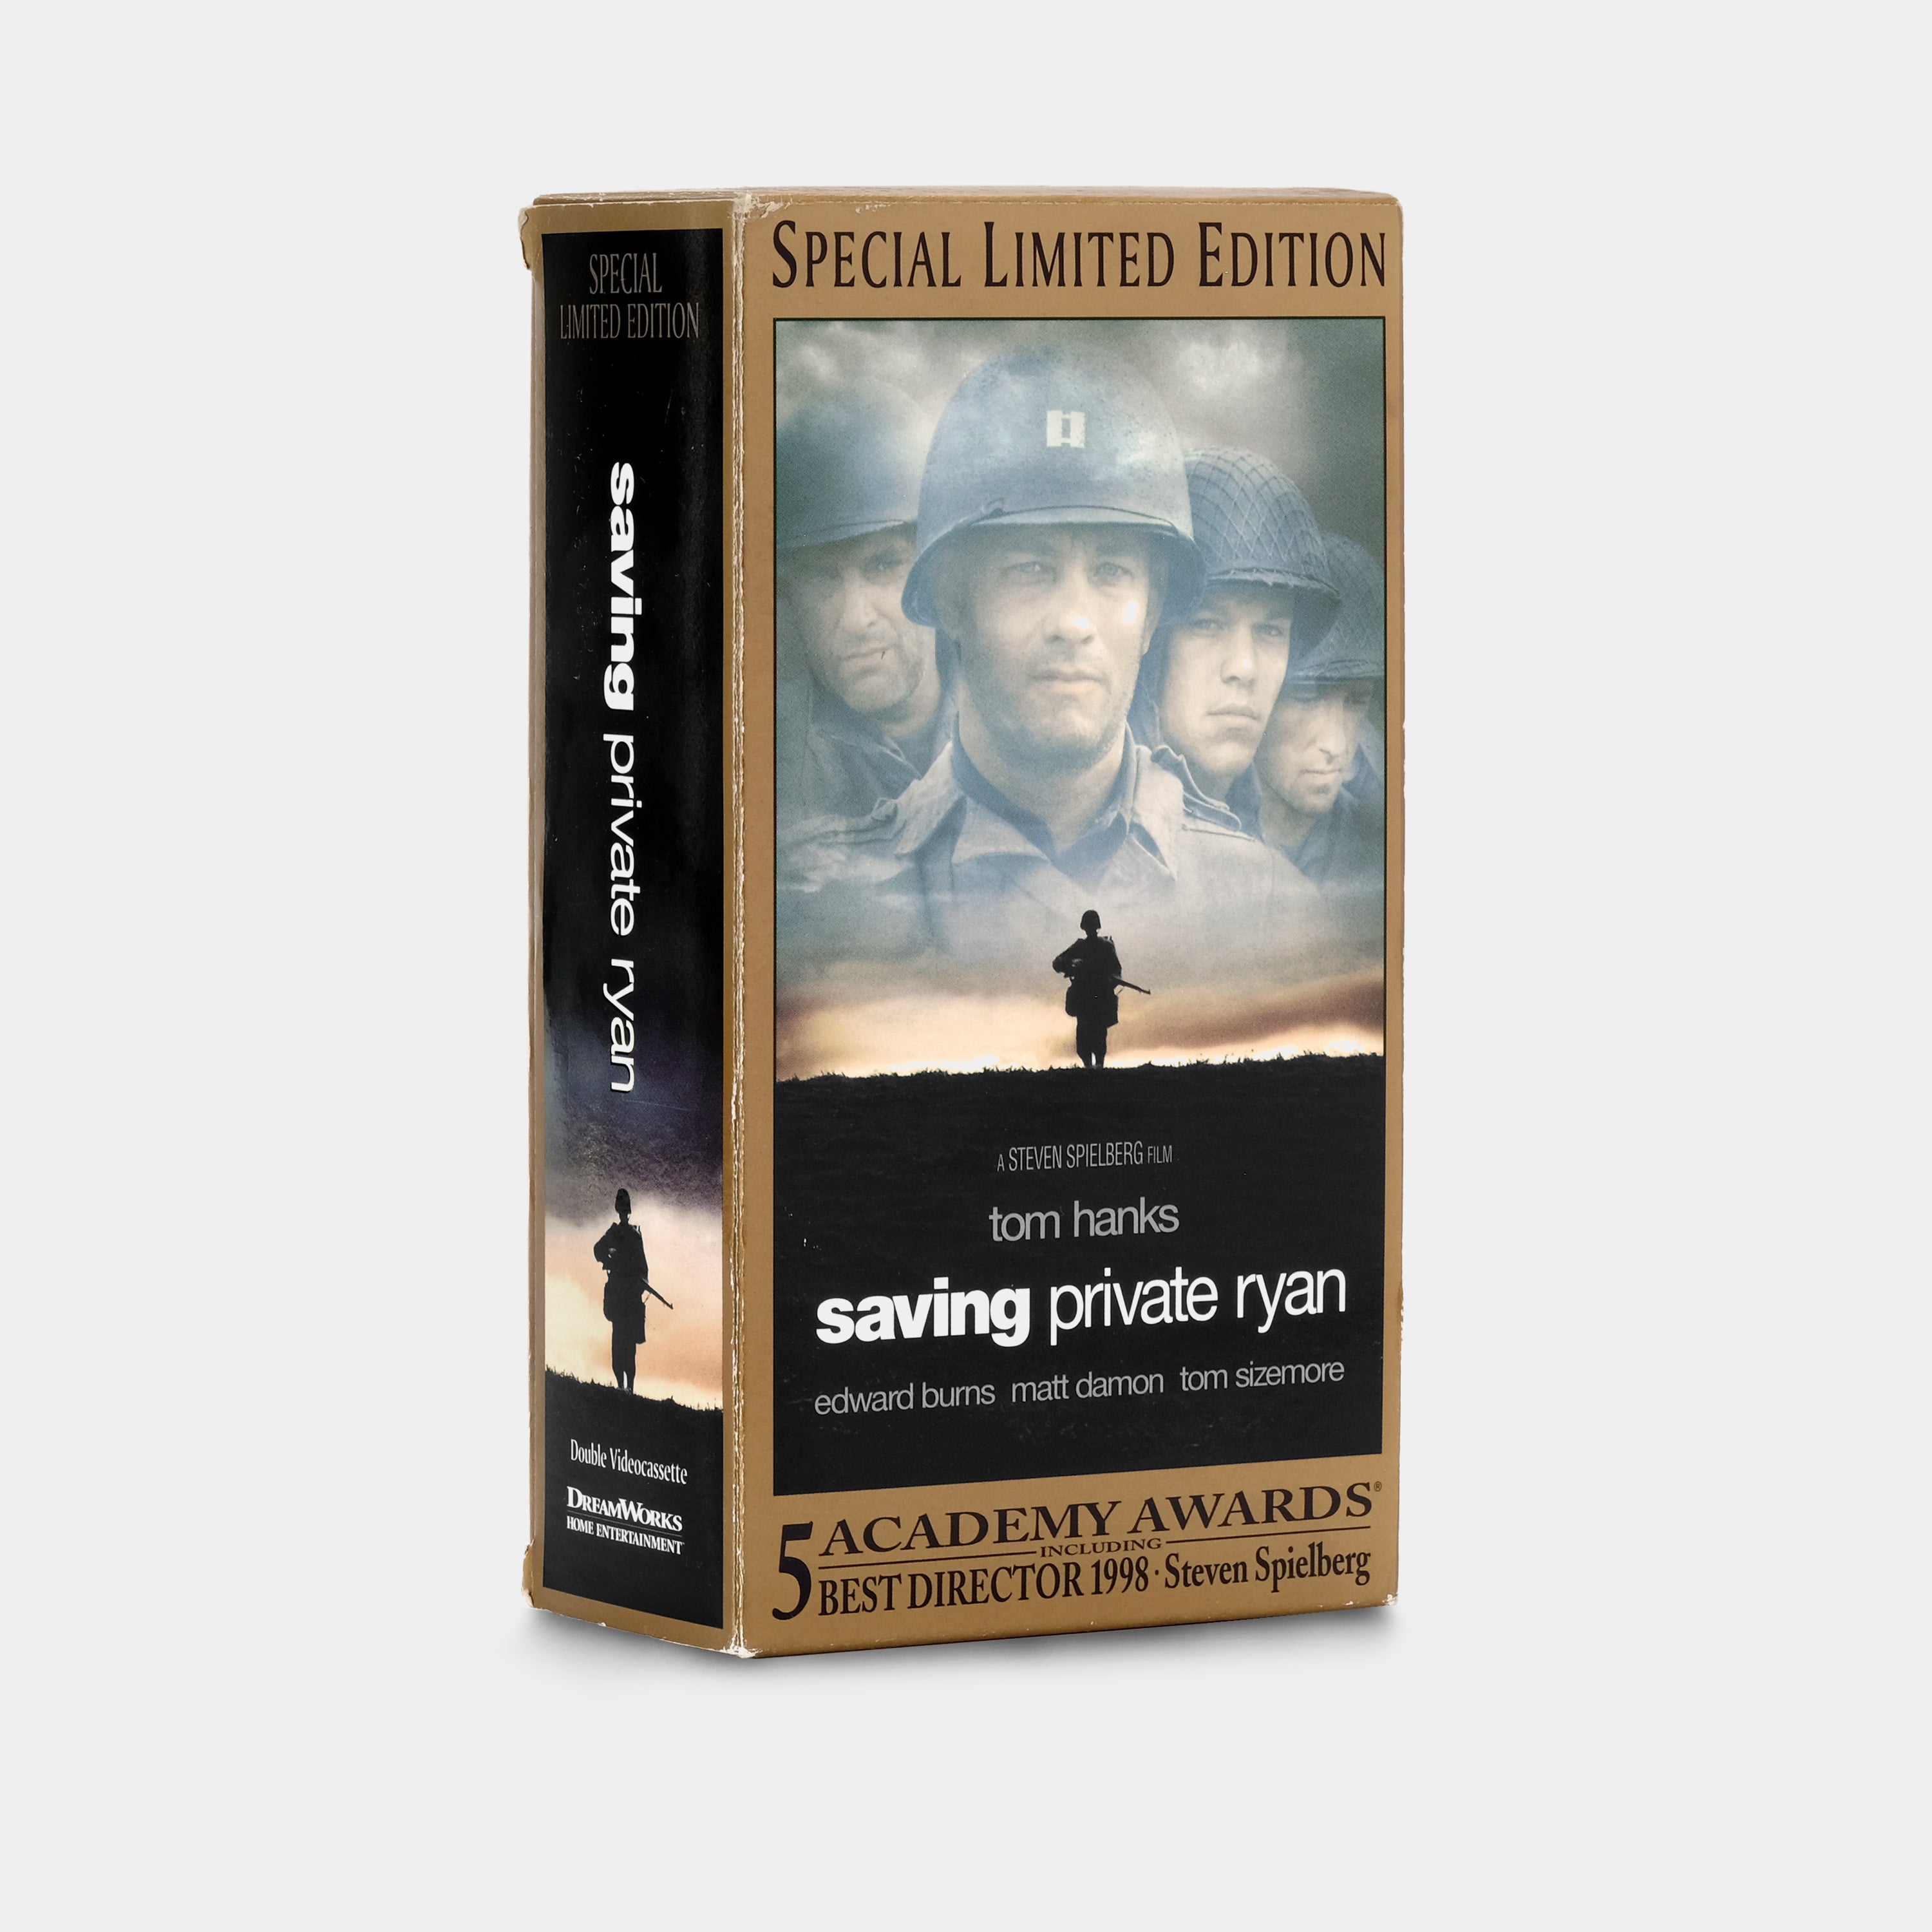 Saving Private Ryan (Special Limited Edition) VHS Tape Set